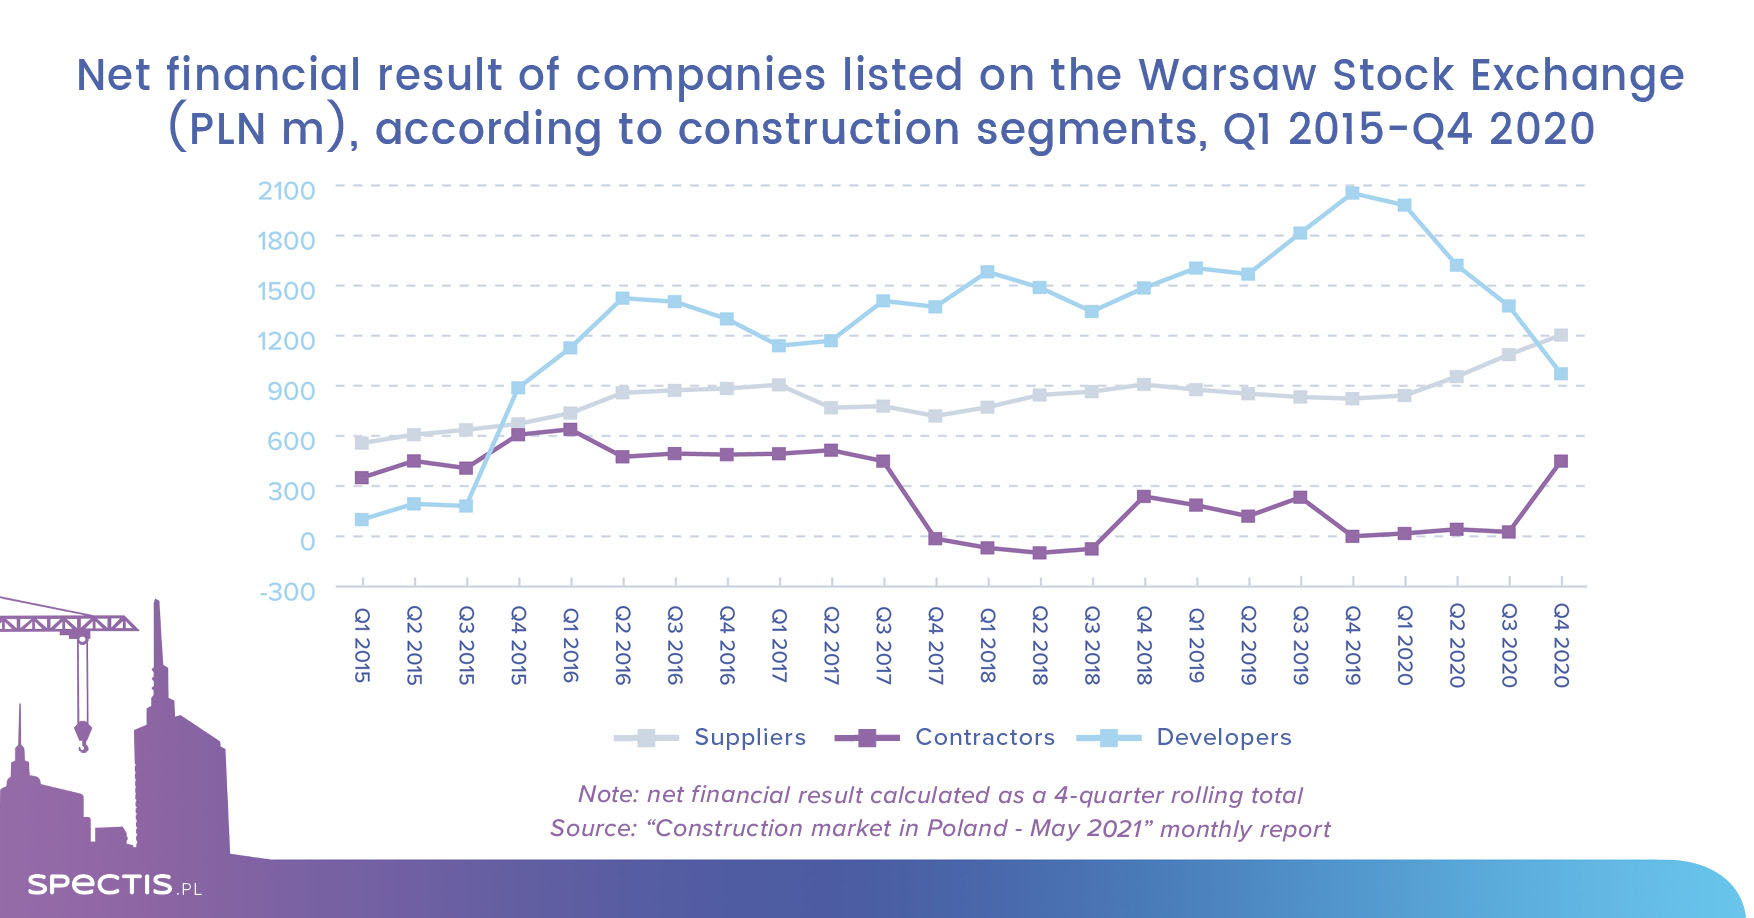 WSE-listed construction companies with strong profit-margin improvement in 2020